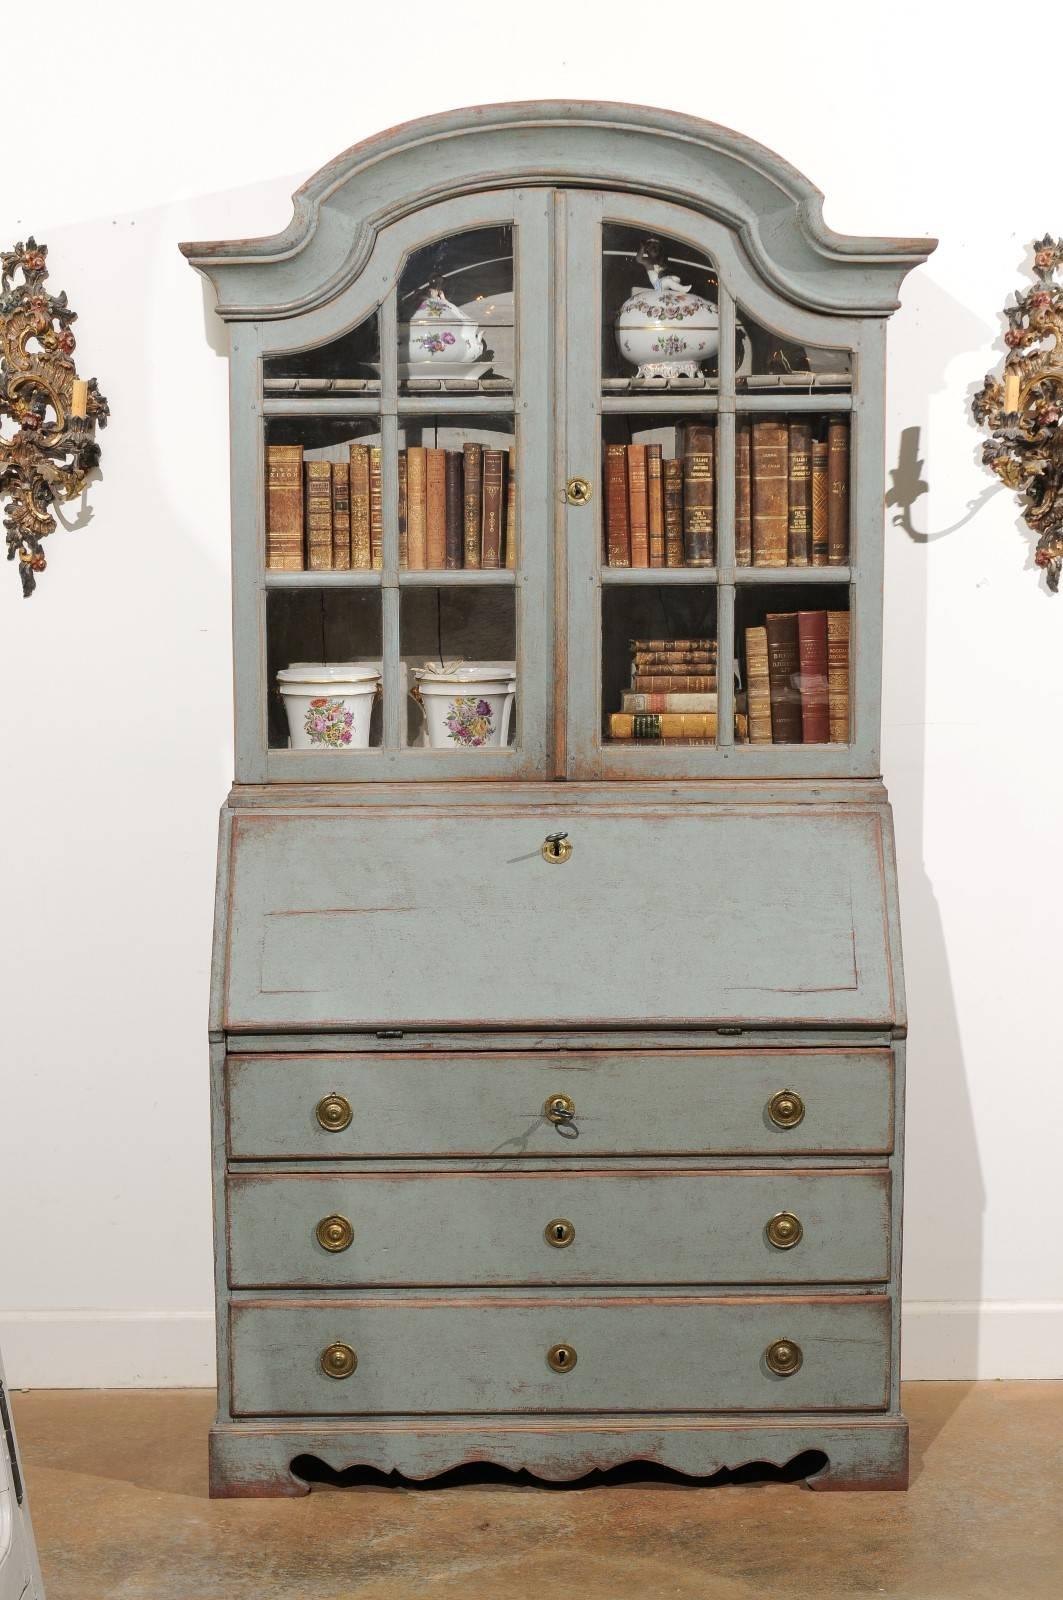 A Swedish Rococo style light grey / blue painted tall secretary with glass doors cabinet from the late 19th century. This Swedish secretary features a bonnet shaped pediment sitting atop two panelled glass doors. These doors open to reveal inner